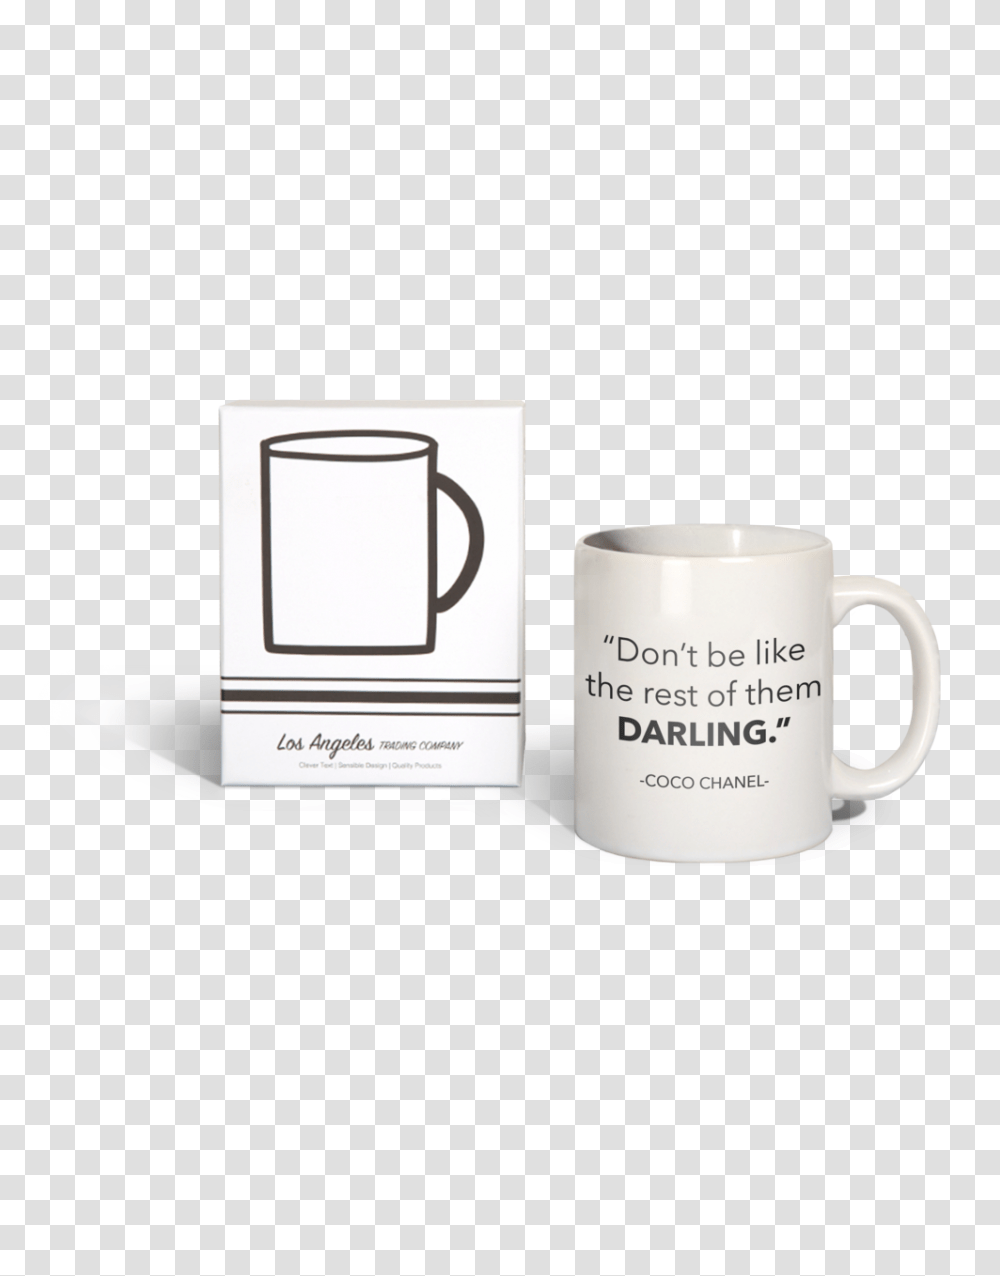 Mug 15 Oz Don't Be Like The Rest Darling Coco Chanel Mug, Coffee Cup, Smoke Pipe Transparent Png